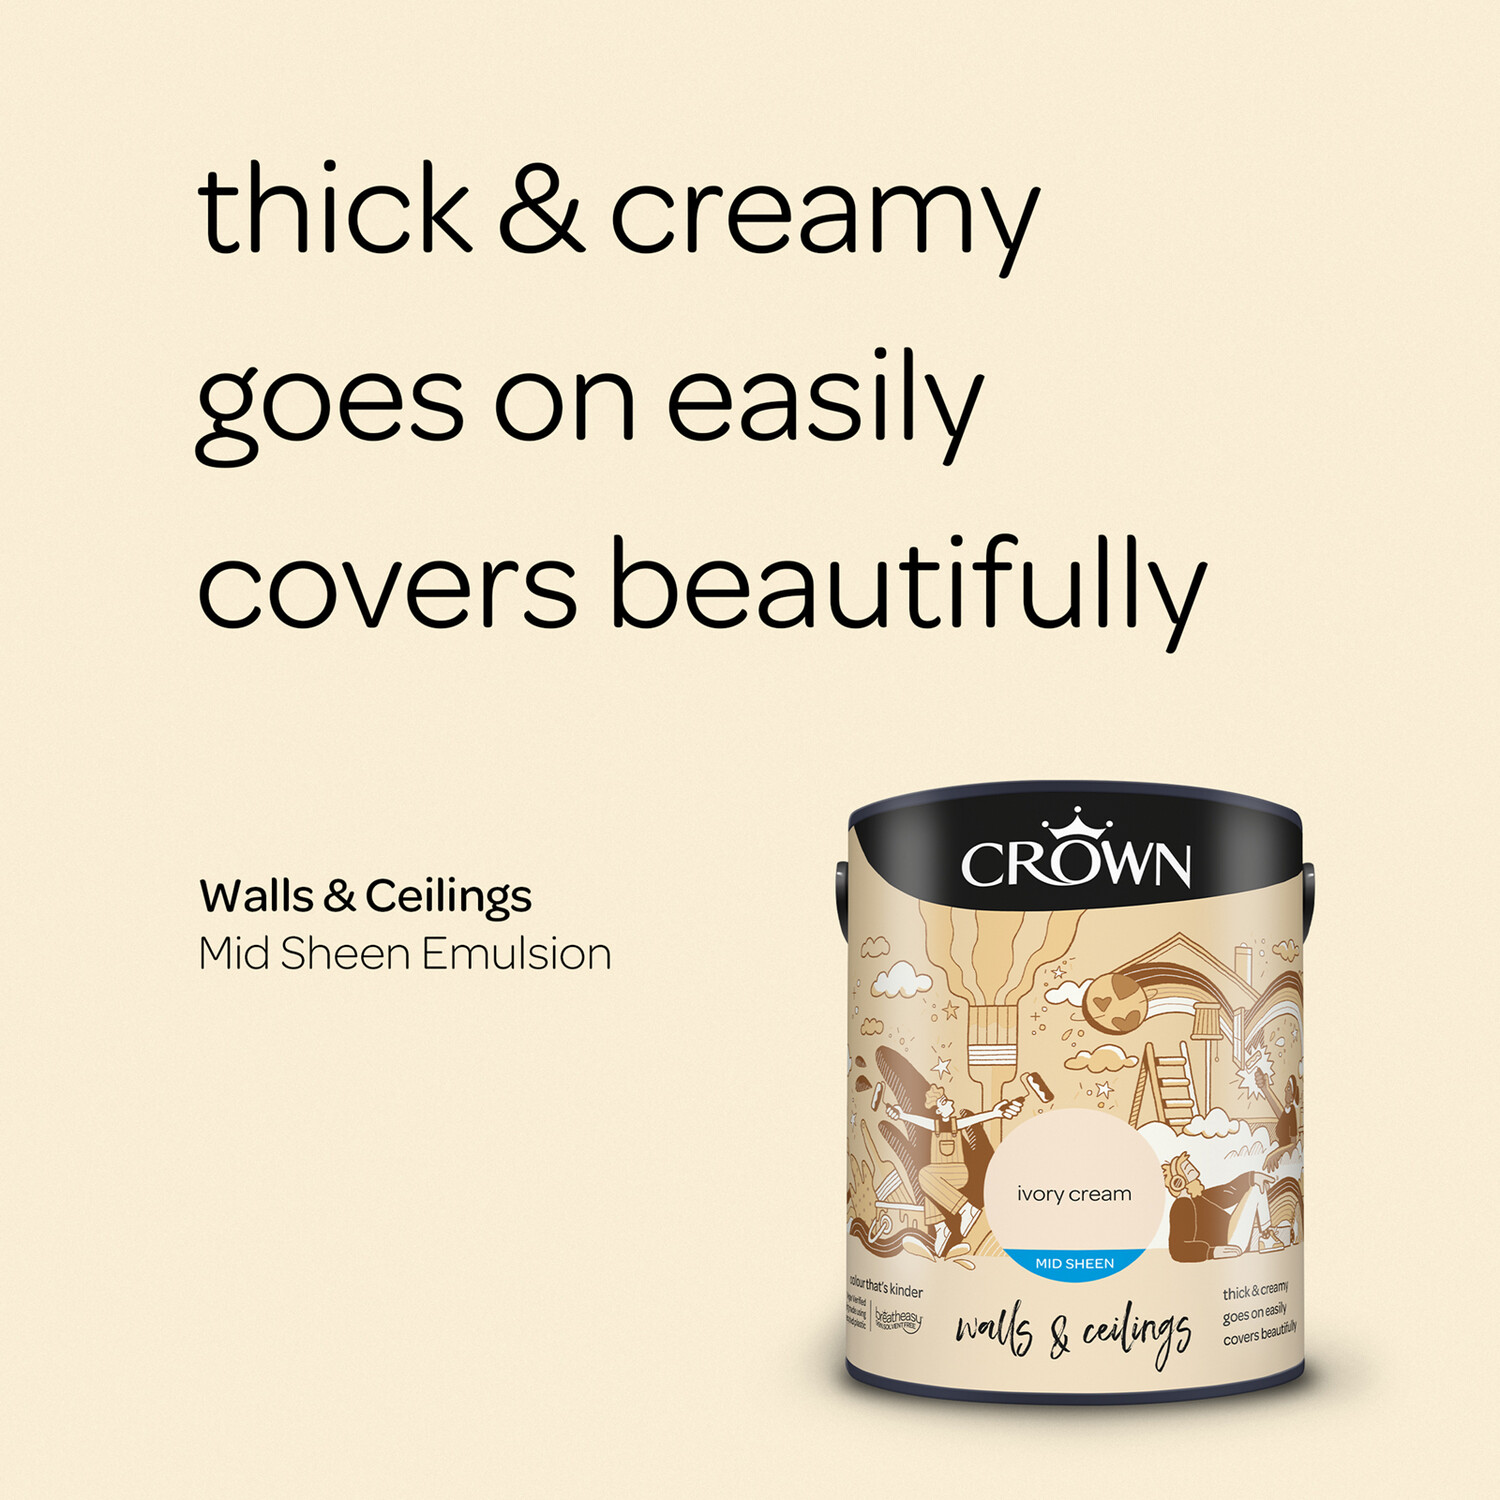 Crown Walls & Ceilings Ivory Cream Mid Sheen Emulsion Paint 5L Image 8